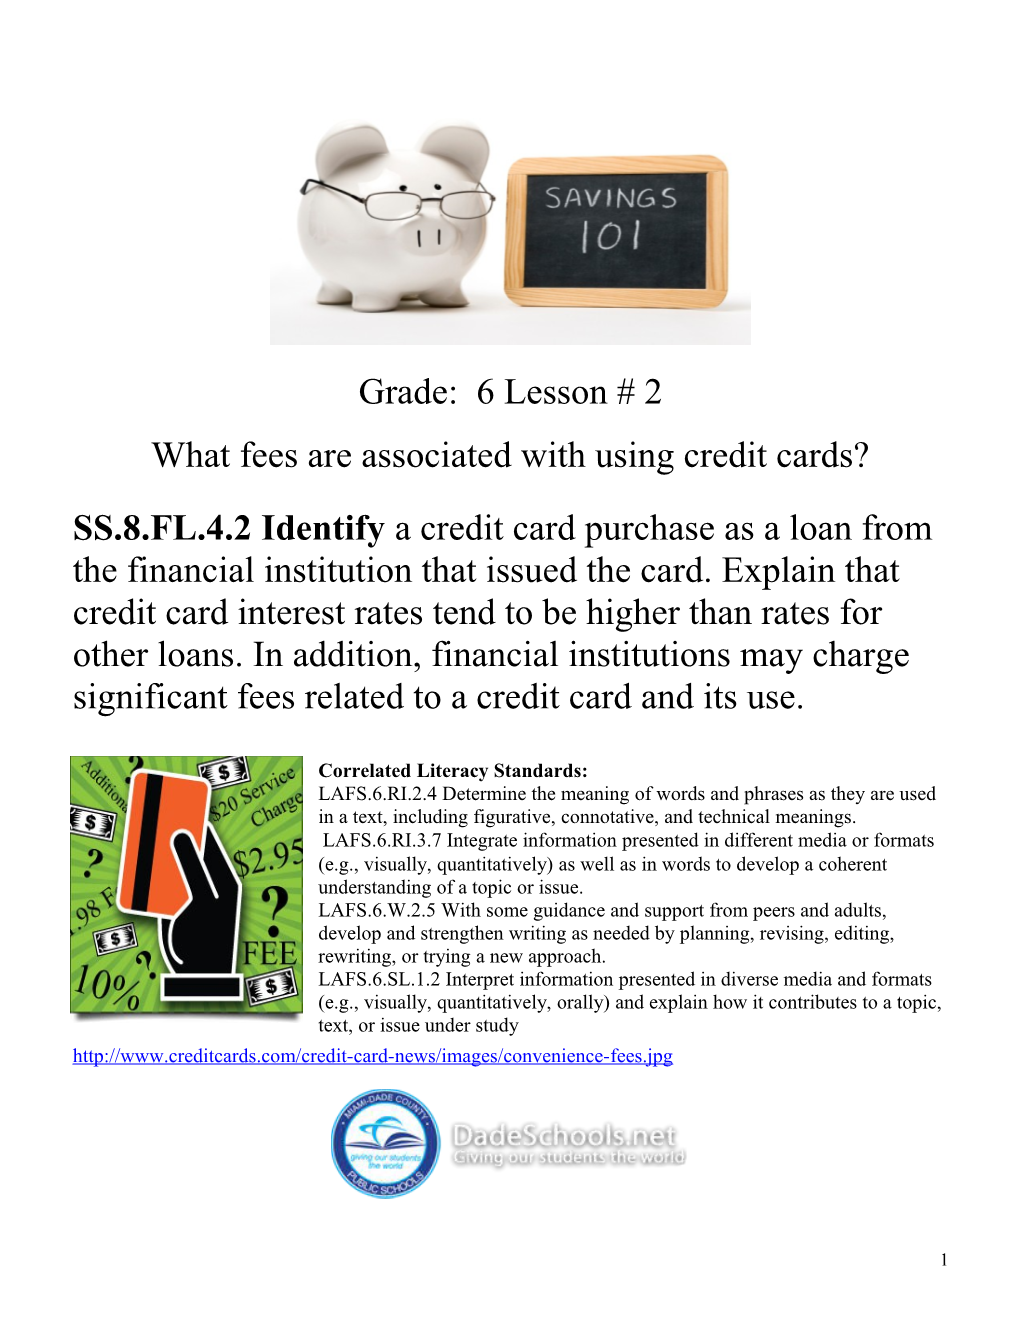 What Fees Are Associated with Using Credit Cards?